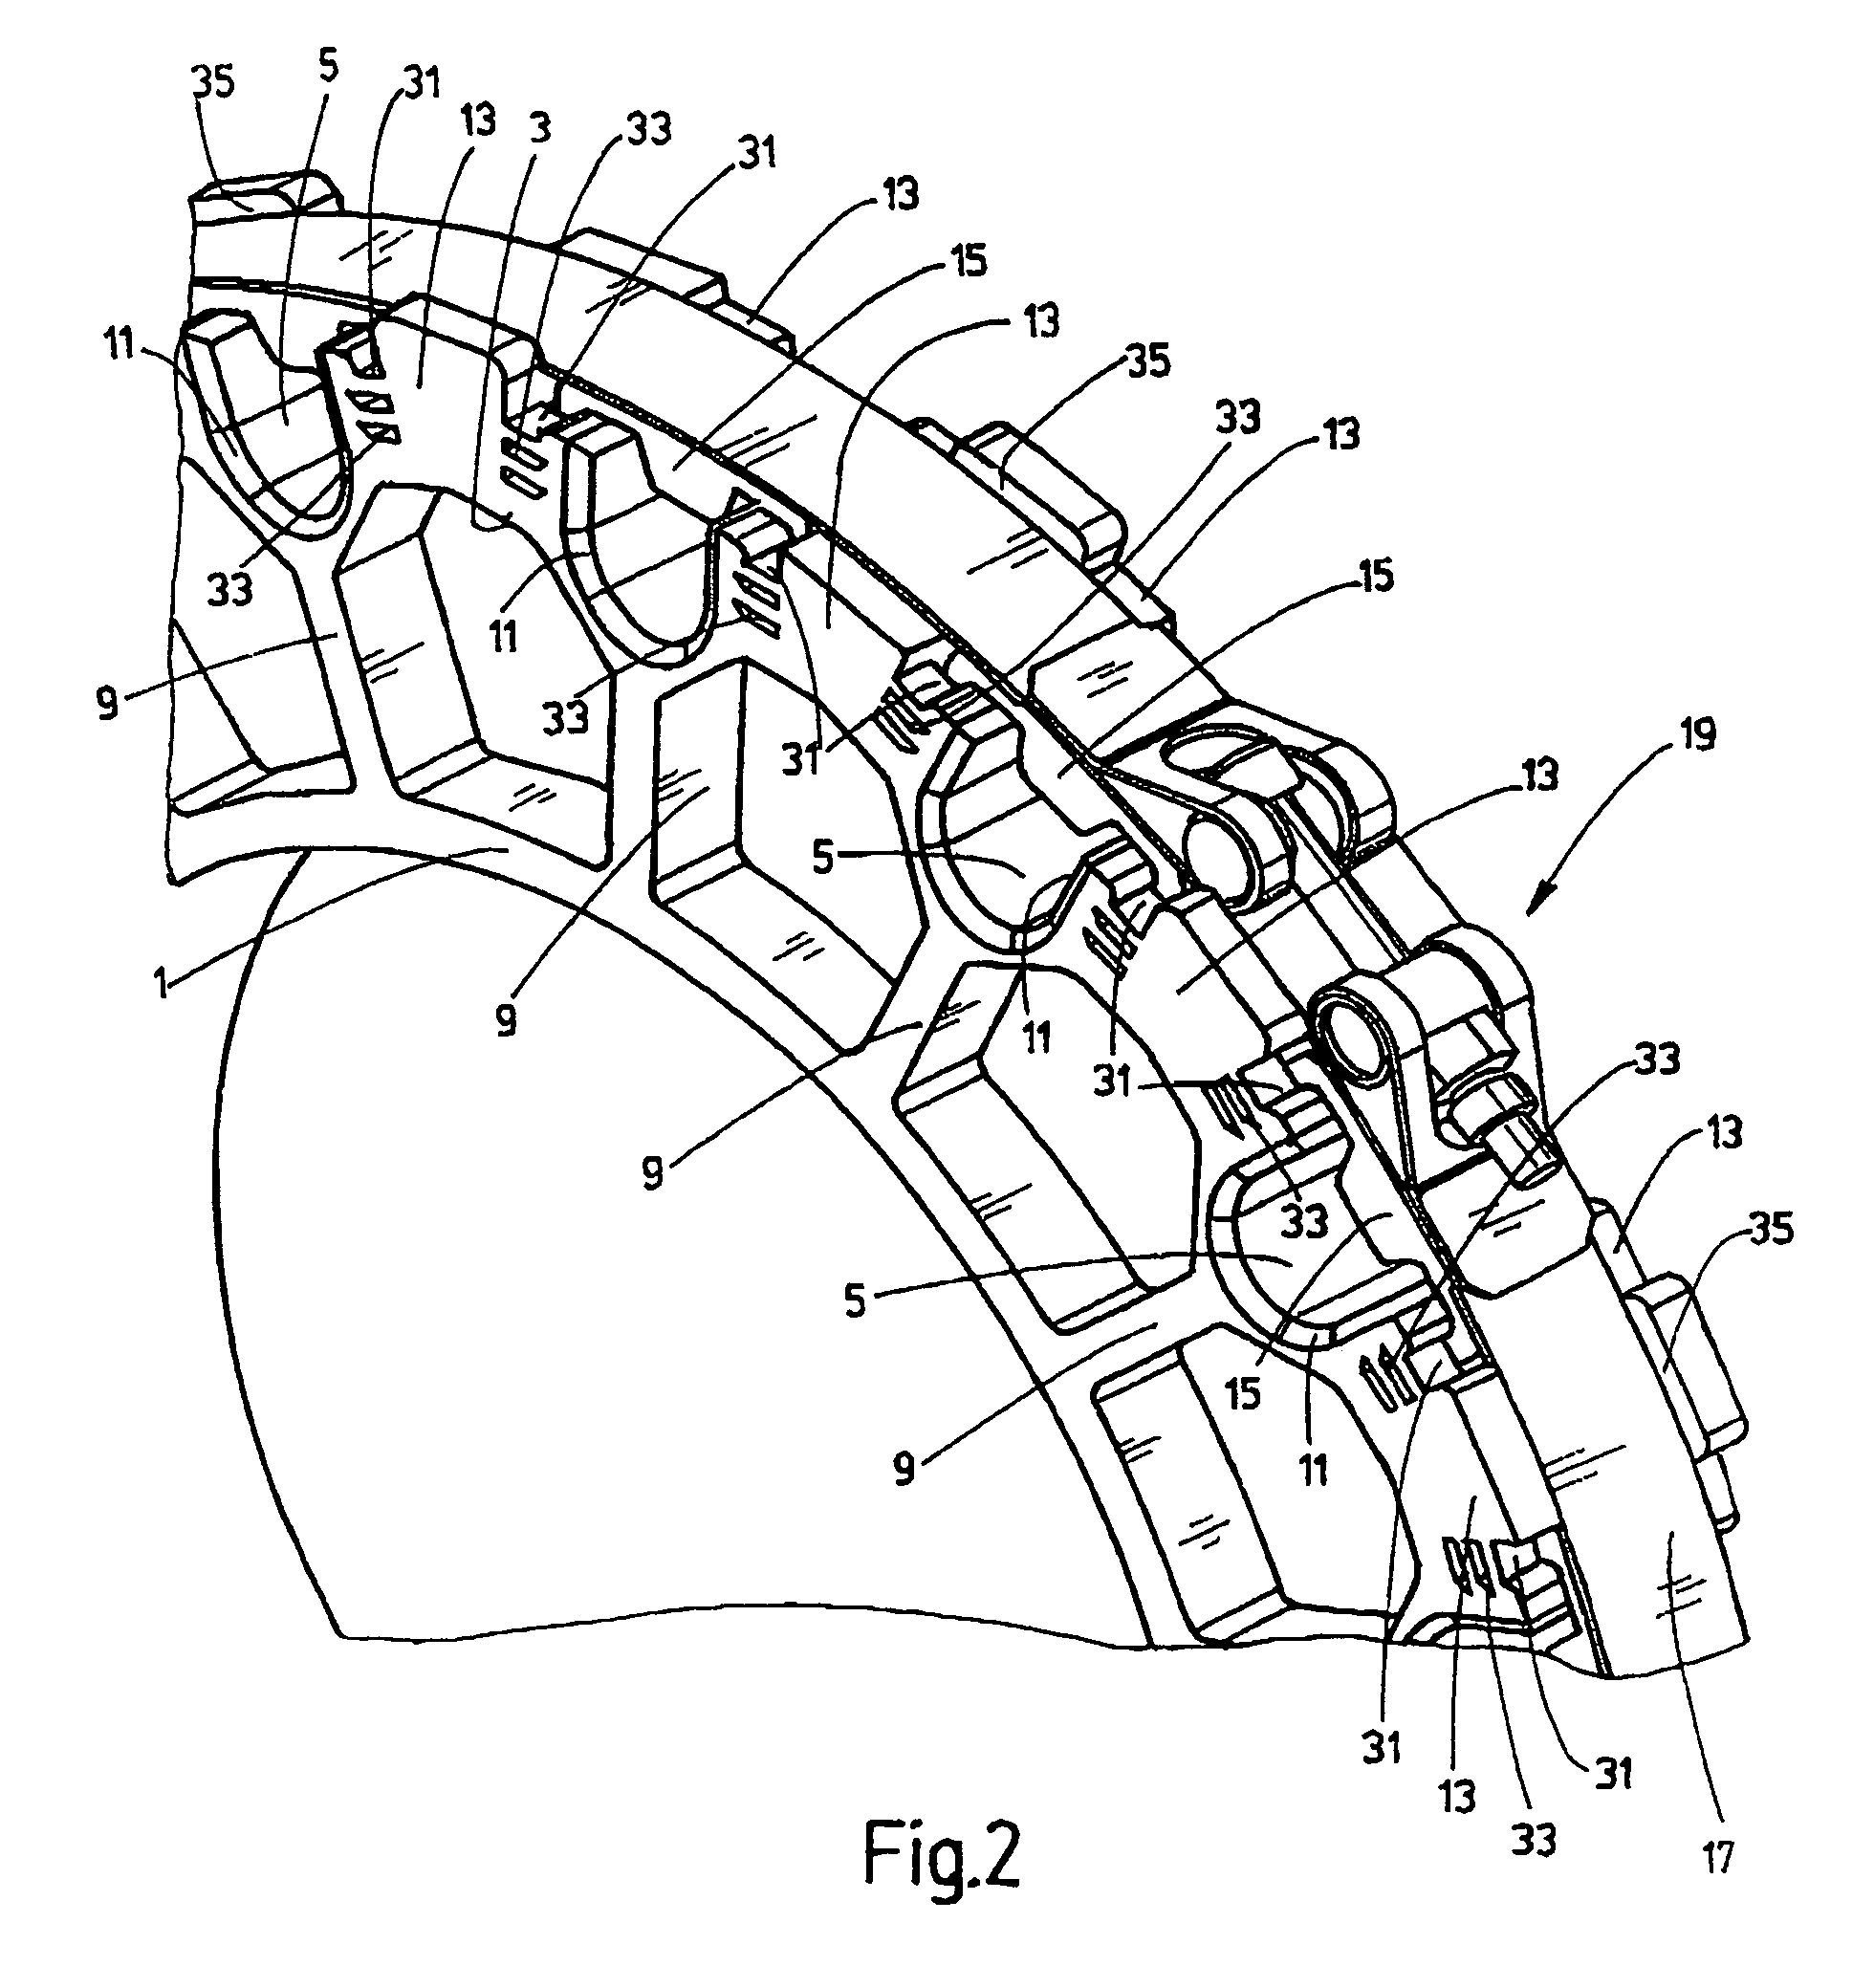 Attachment system for cables, in particular for wind turbines